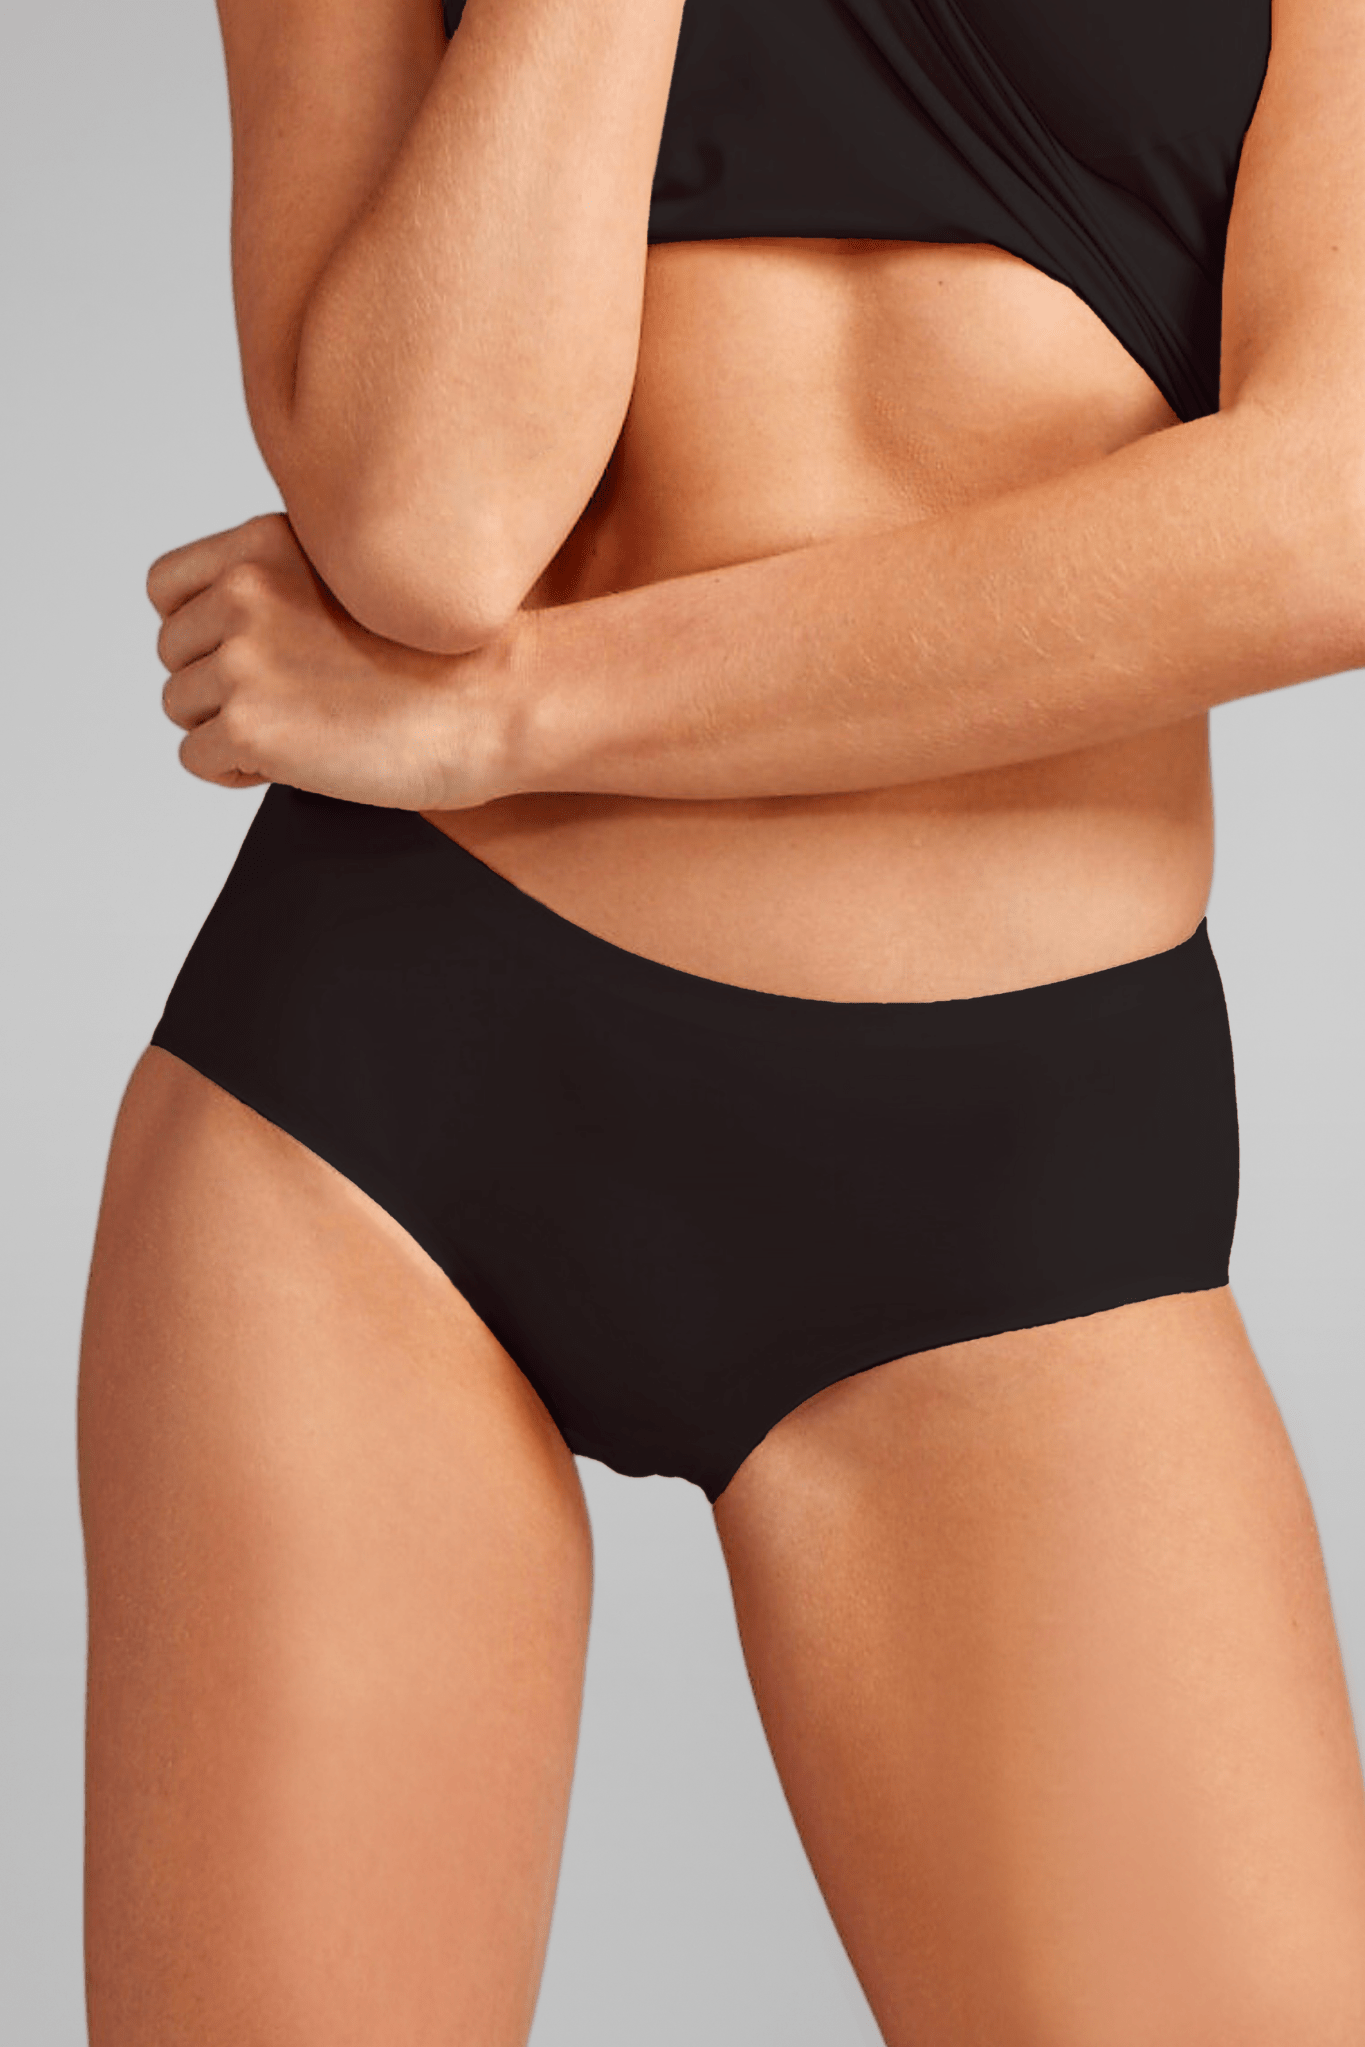 Fit For Me Comfort Solutions Invisible Seamless Briefs Size: 9 (45-46.5)